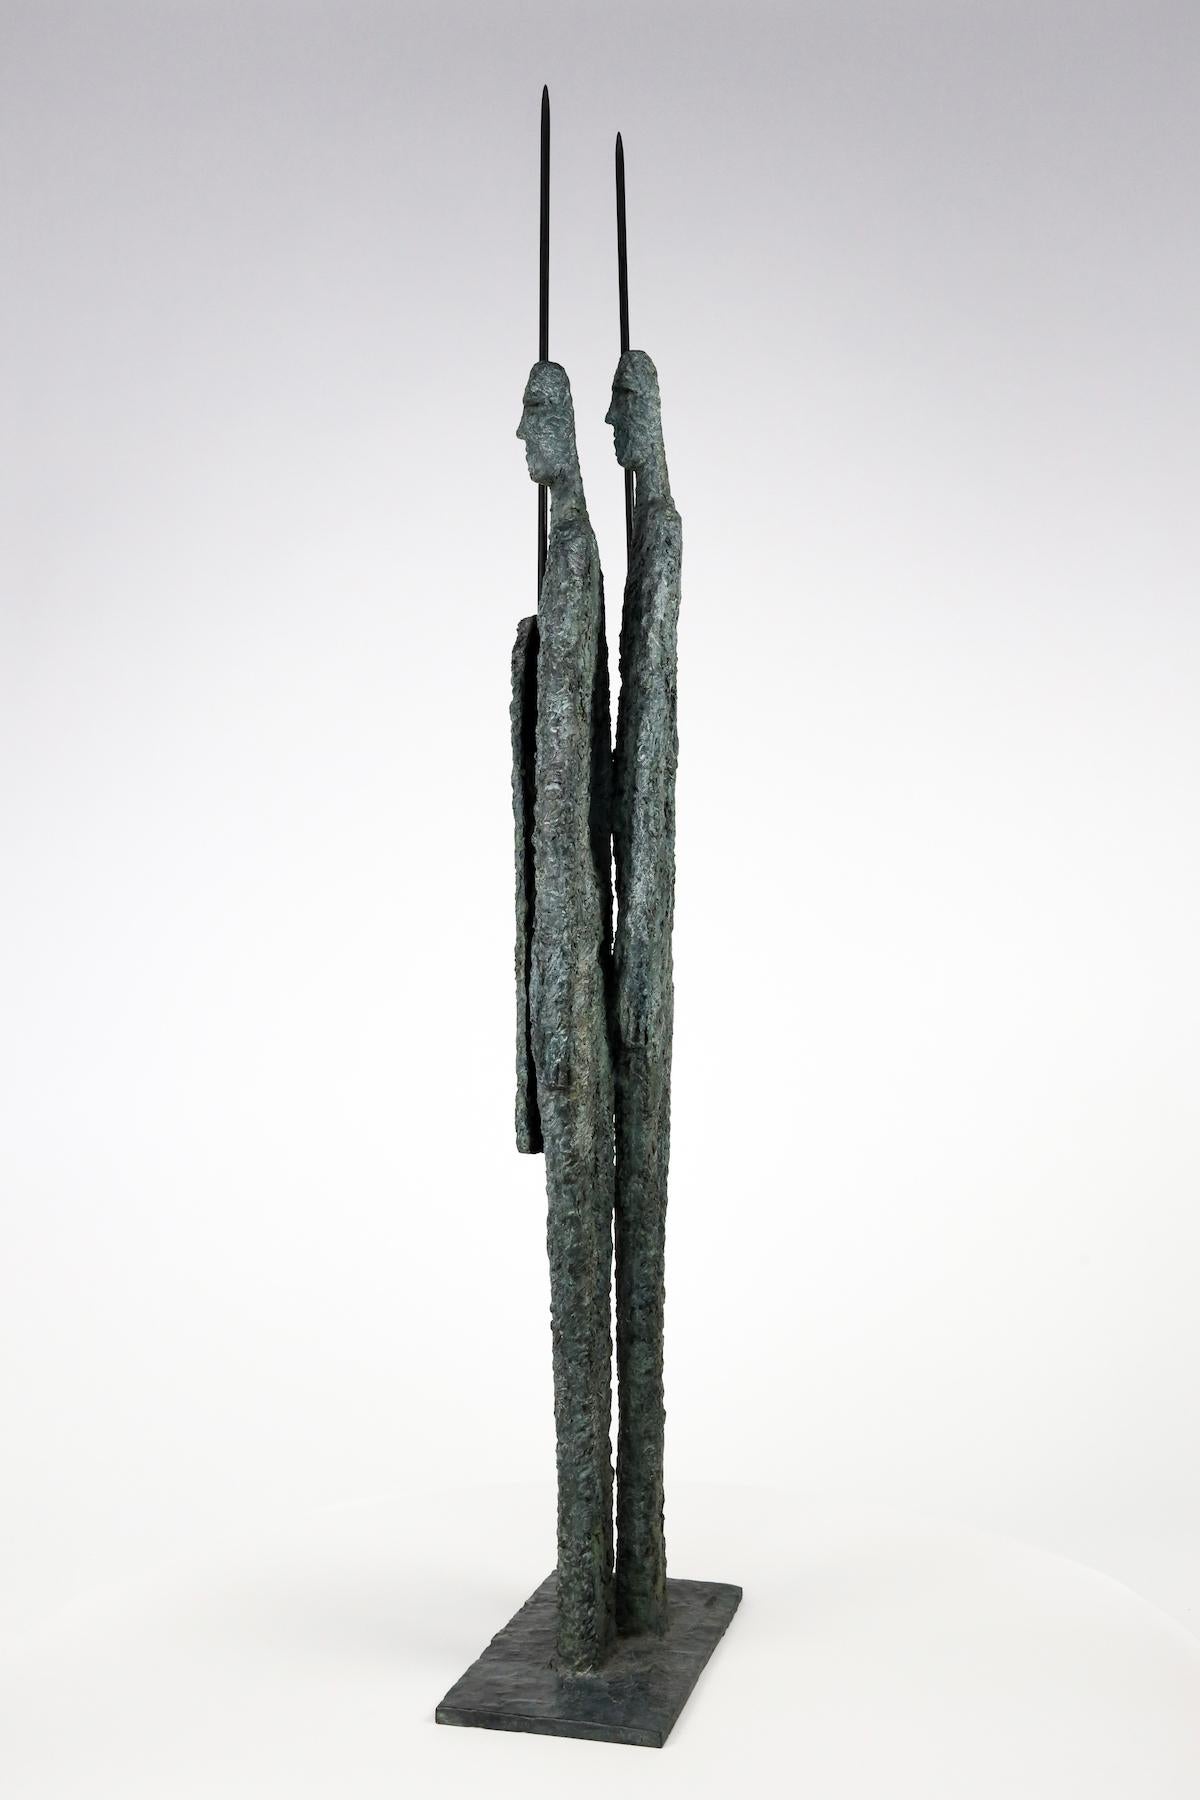 Bronze sculpture, 132 cm × 31 cm × 18 cm. Limited edition of 8 + 4 A.P., each signed and numbered.
Dimensions include the base of the sculpture, which is H 1 cm x W 31 cm x D 18 cm. 

Photo credit: © Christian Baraja, © Martine Demal, @ ADAGP